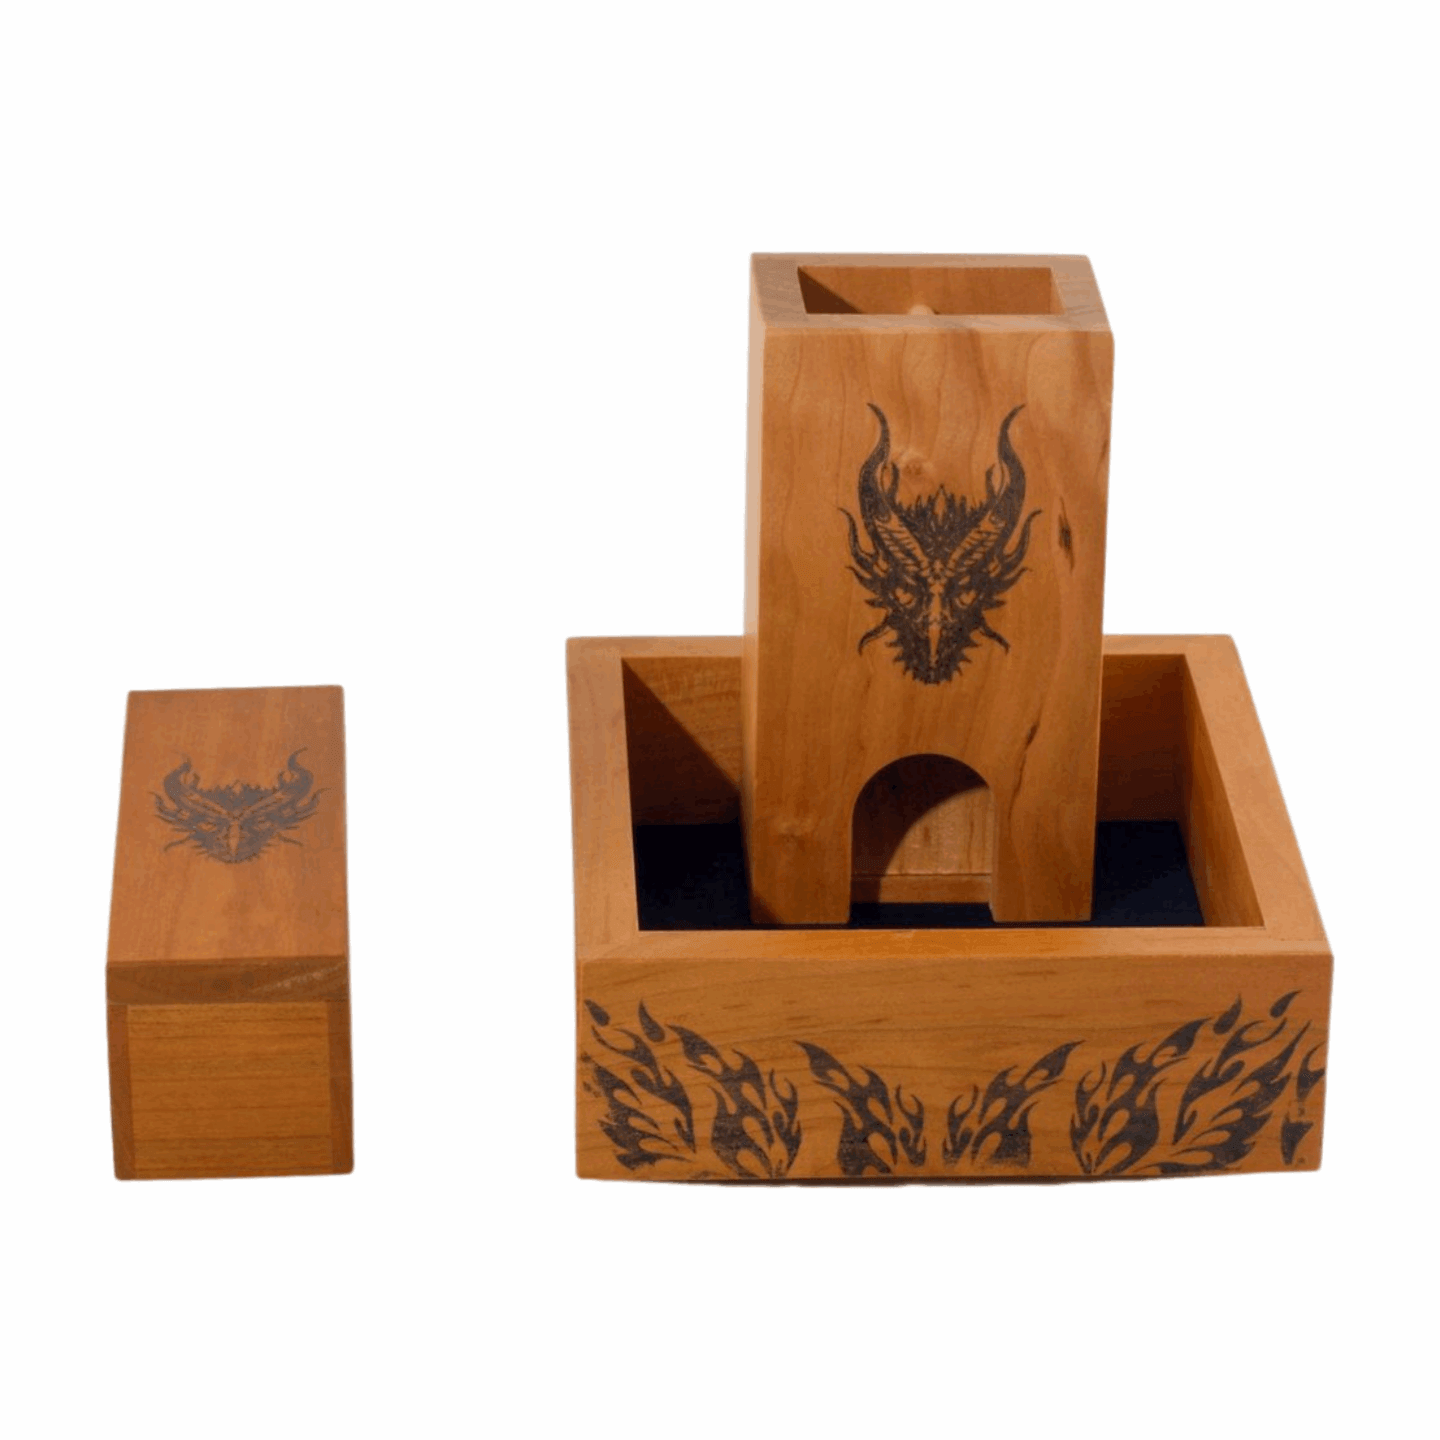 Dragon Wooden Dice Tower in Dice Tray and Dice Vault to the side